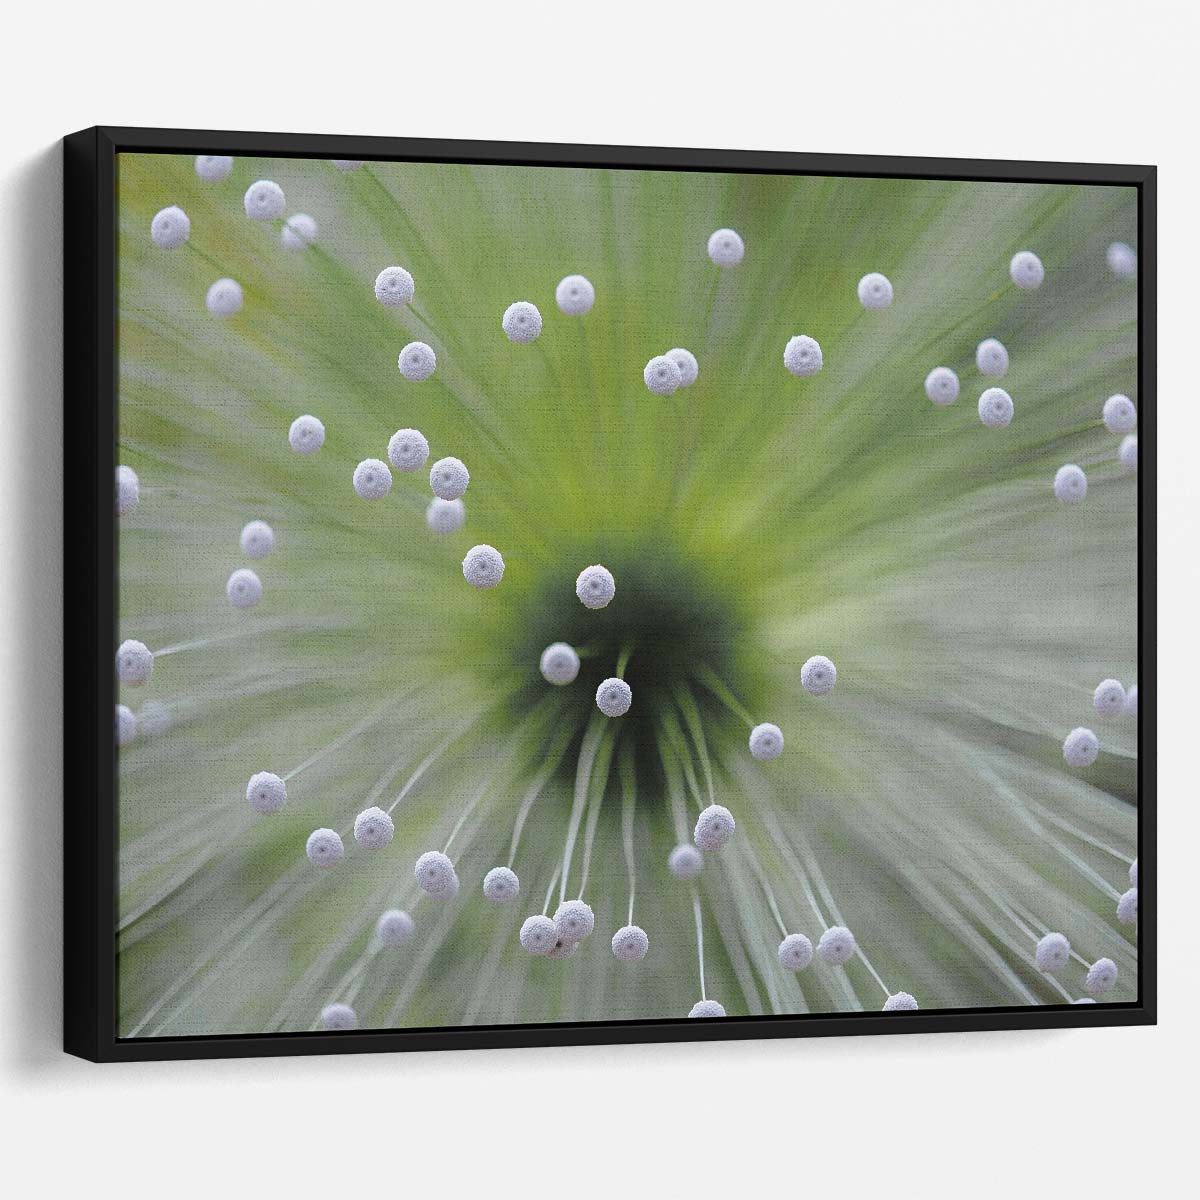 Delicate Macro Floral Bokeh Brazil Wall Art by Luxuriance Designs. Made in USA.